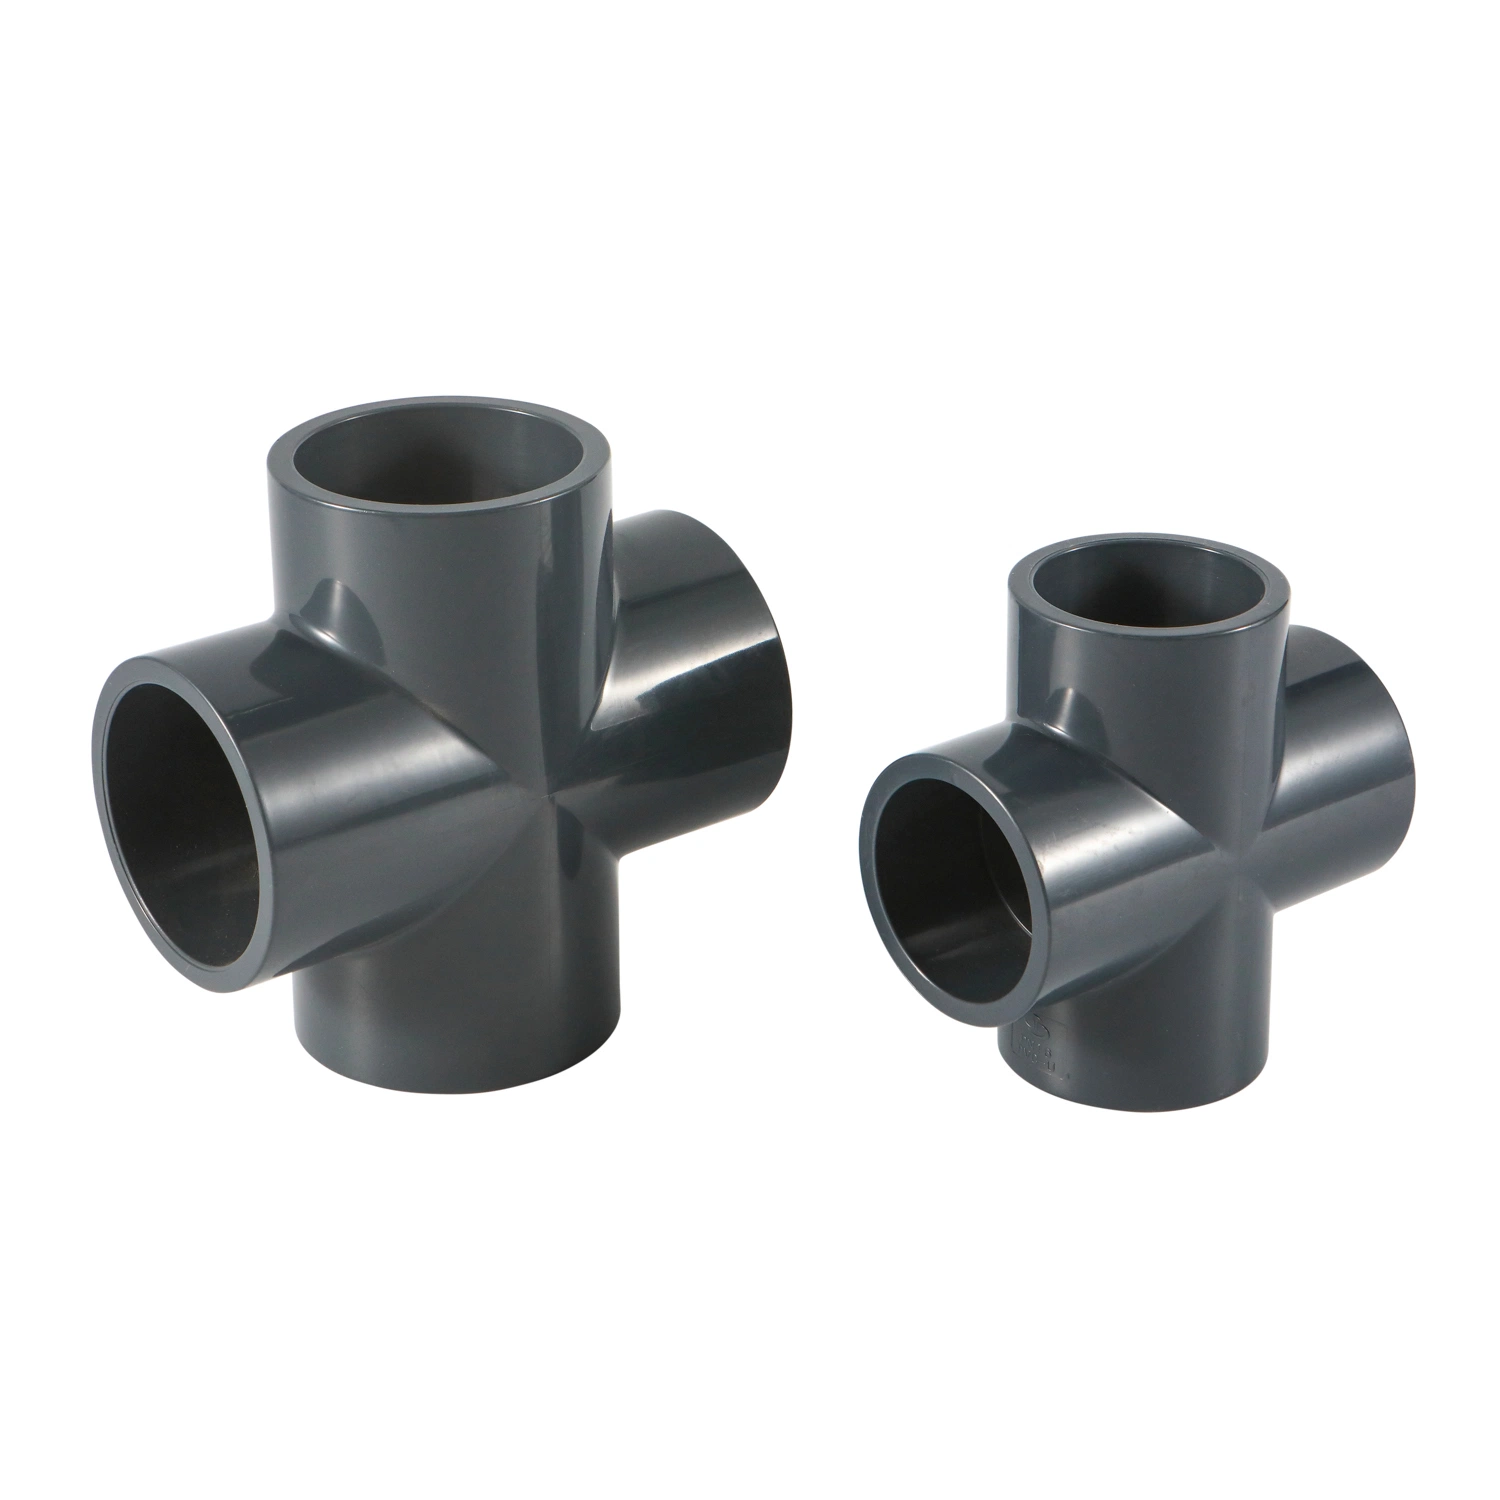 High quality/High cost performance PVC Pipe Fittings-Pn10 Standard Plastic Pipe Fitting Equal Cross for Water Supply